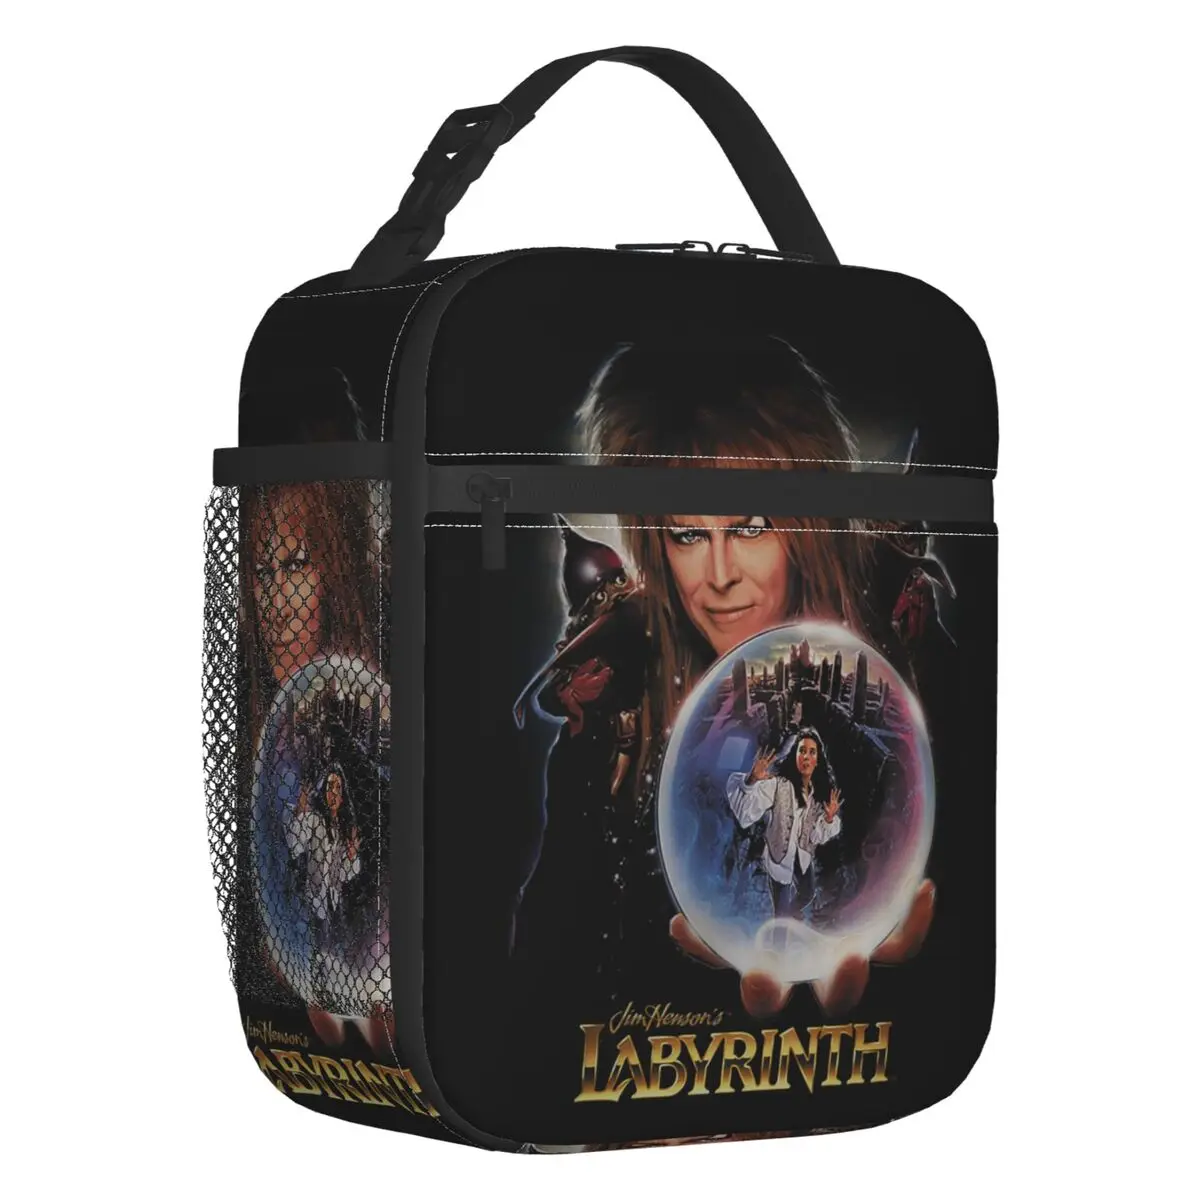 Jareth The Goblin King Labyrinth Insulated Lunch Bag for Women Leakproof Fantasy Film Cooler Thermal Lunch Tote Work School